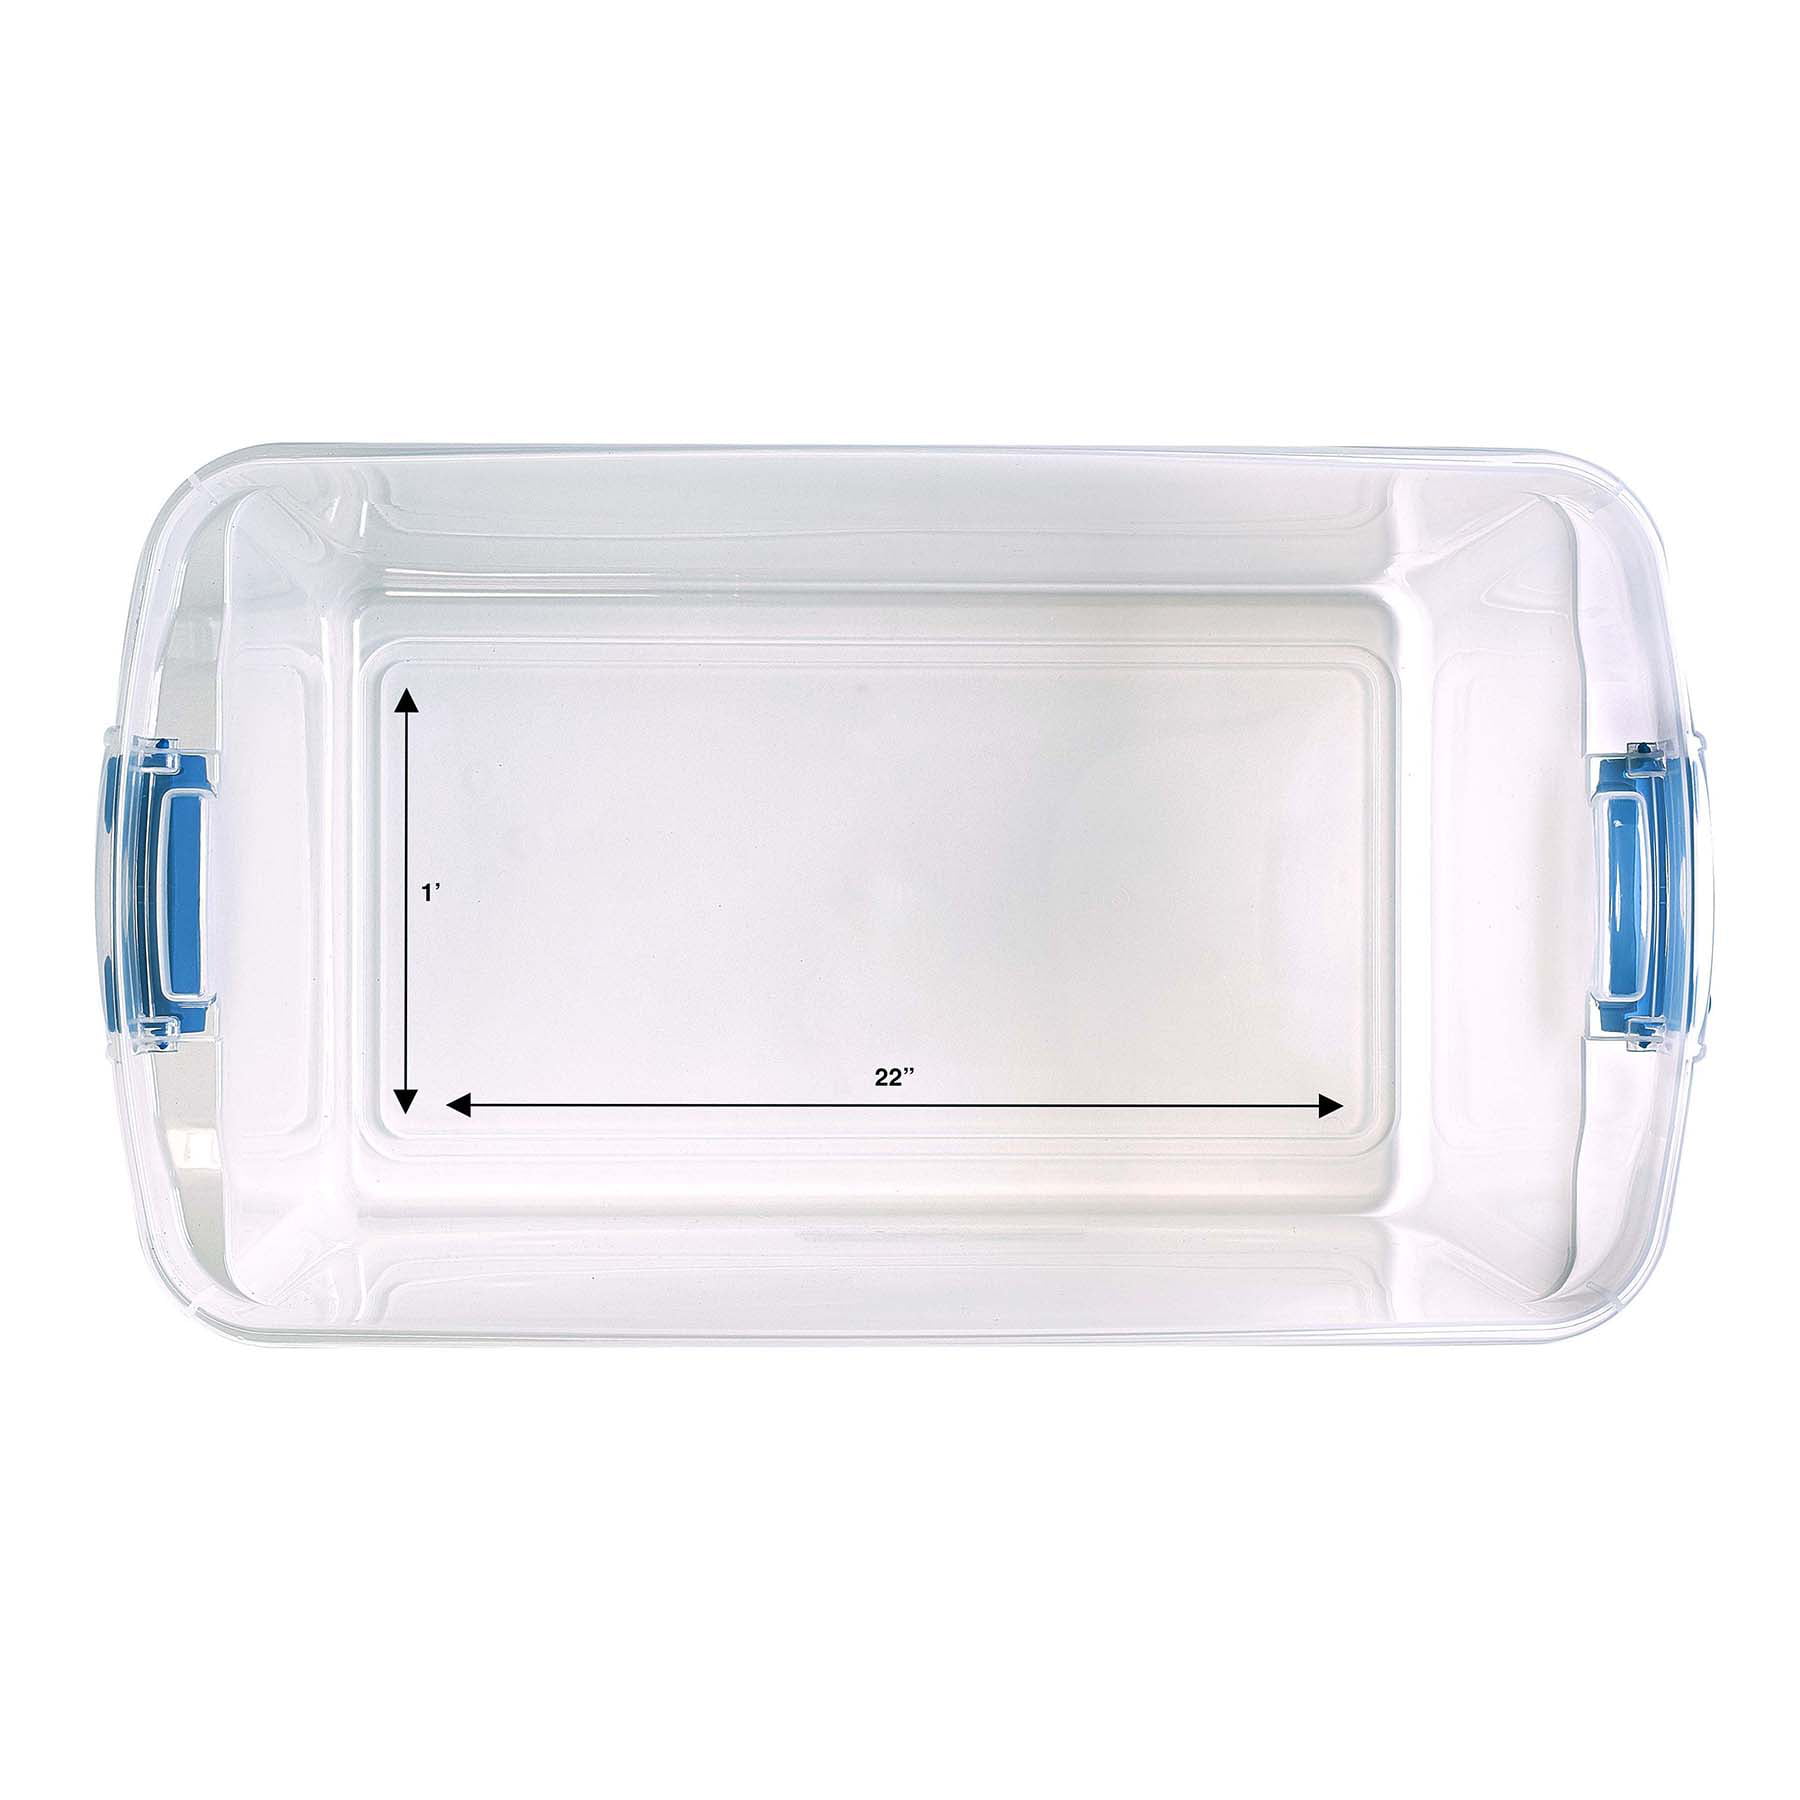 Homz 112 Quart Plastic Storage Latching Container, Clear/Blue, Set of 2 - 2